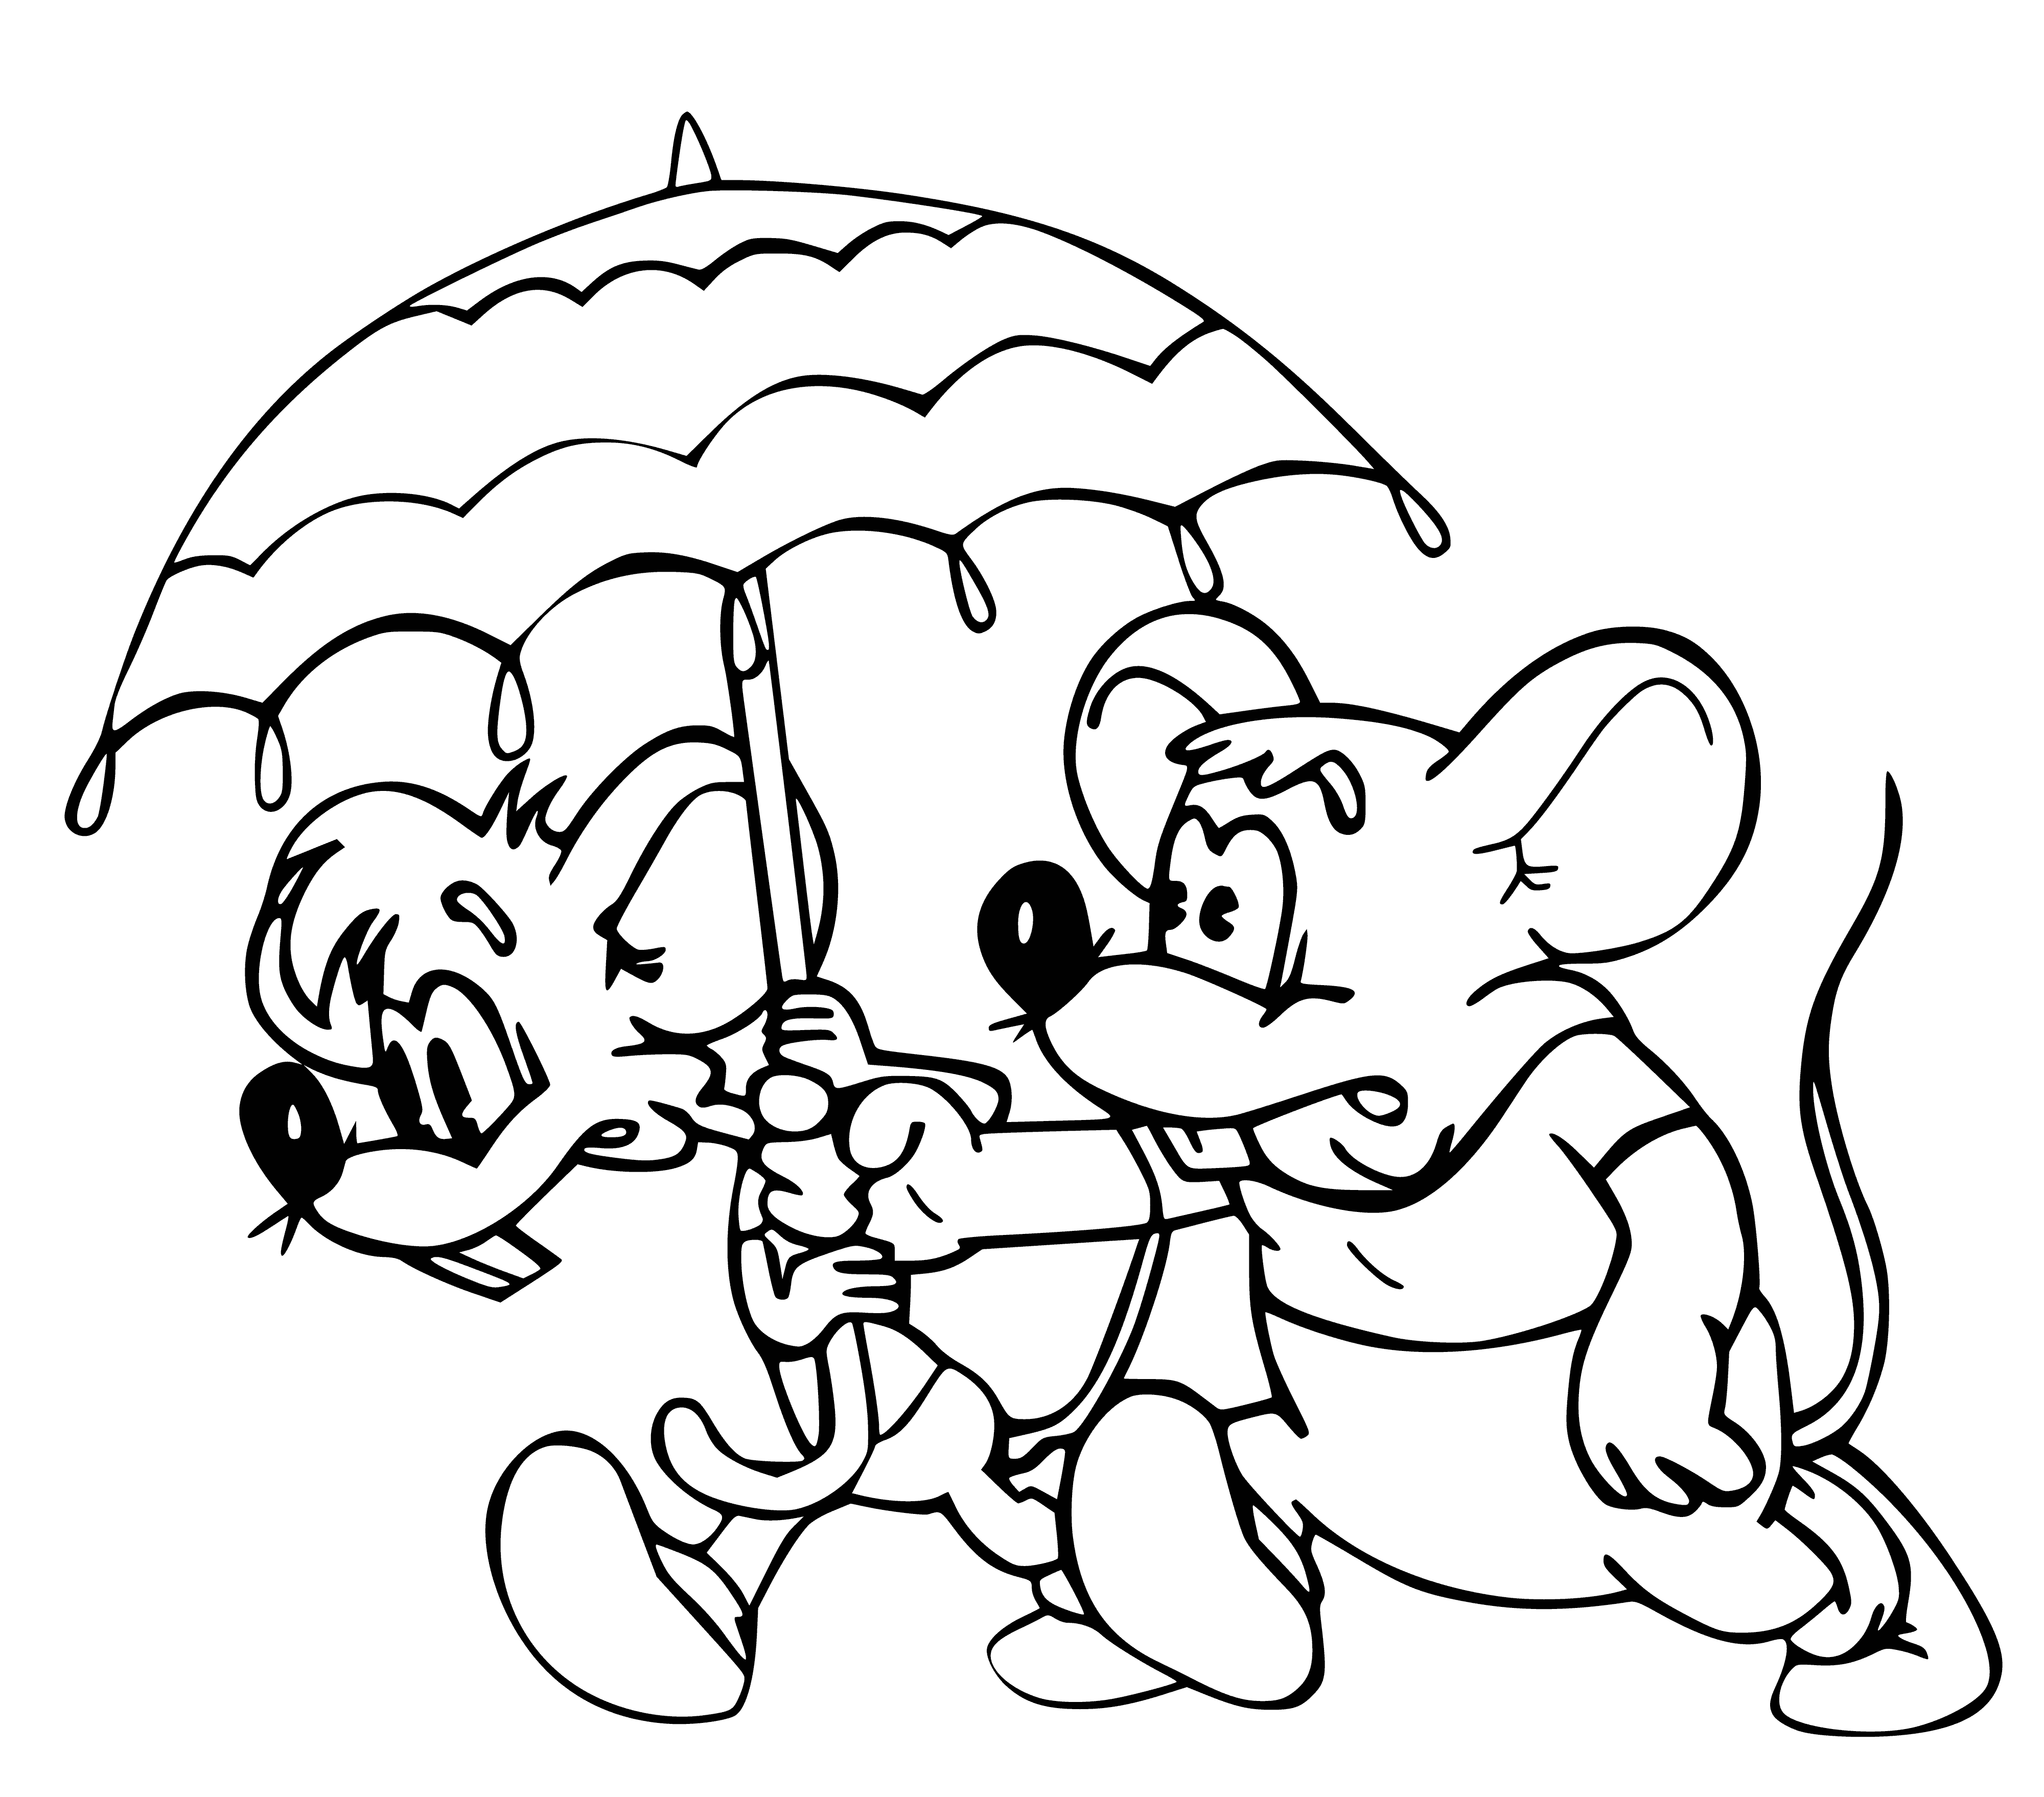 coloring page: Cat chases mouse in coloring page; mouse runs away.